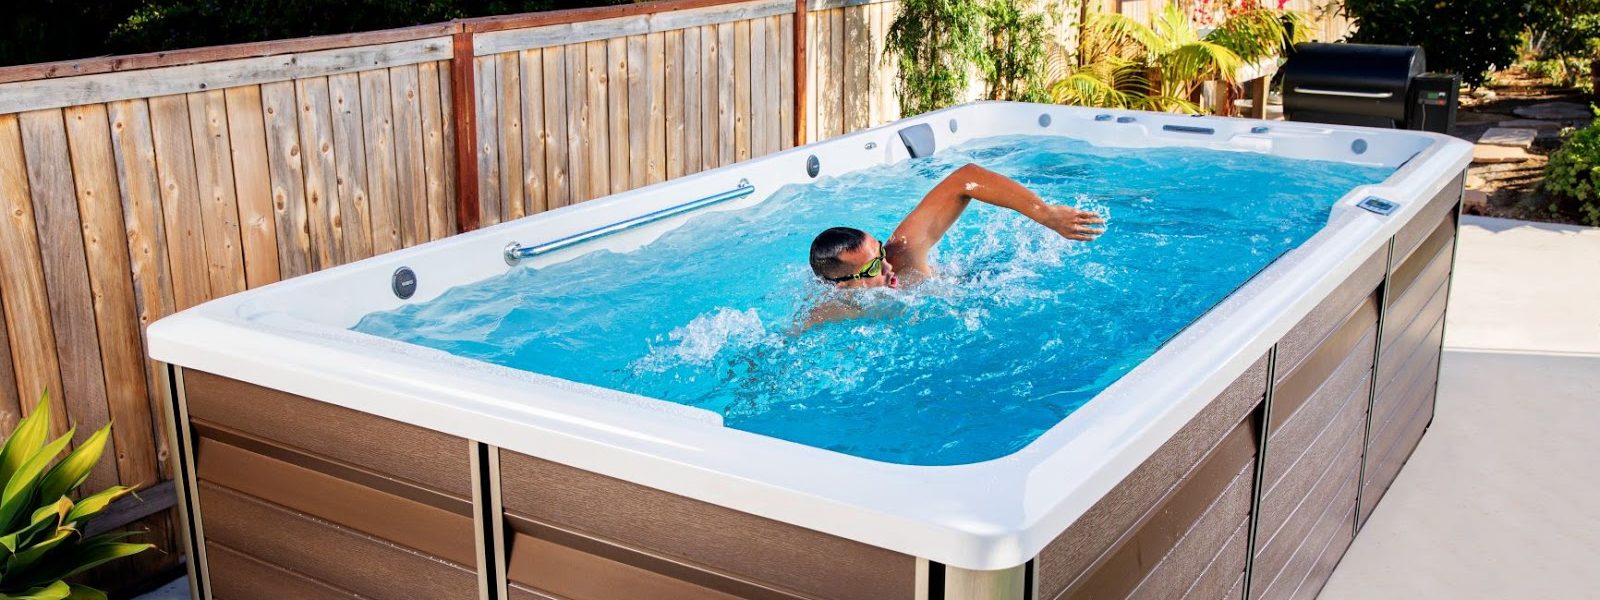 Swim spa set up in backyard with swimmer